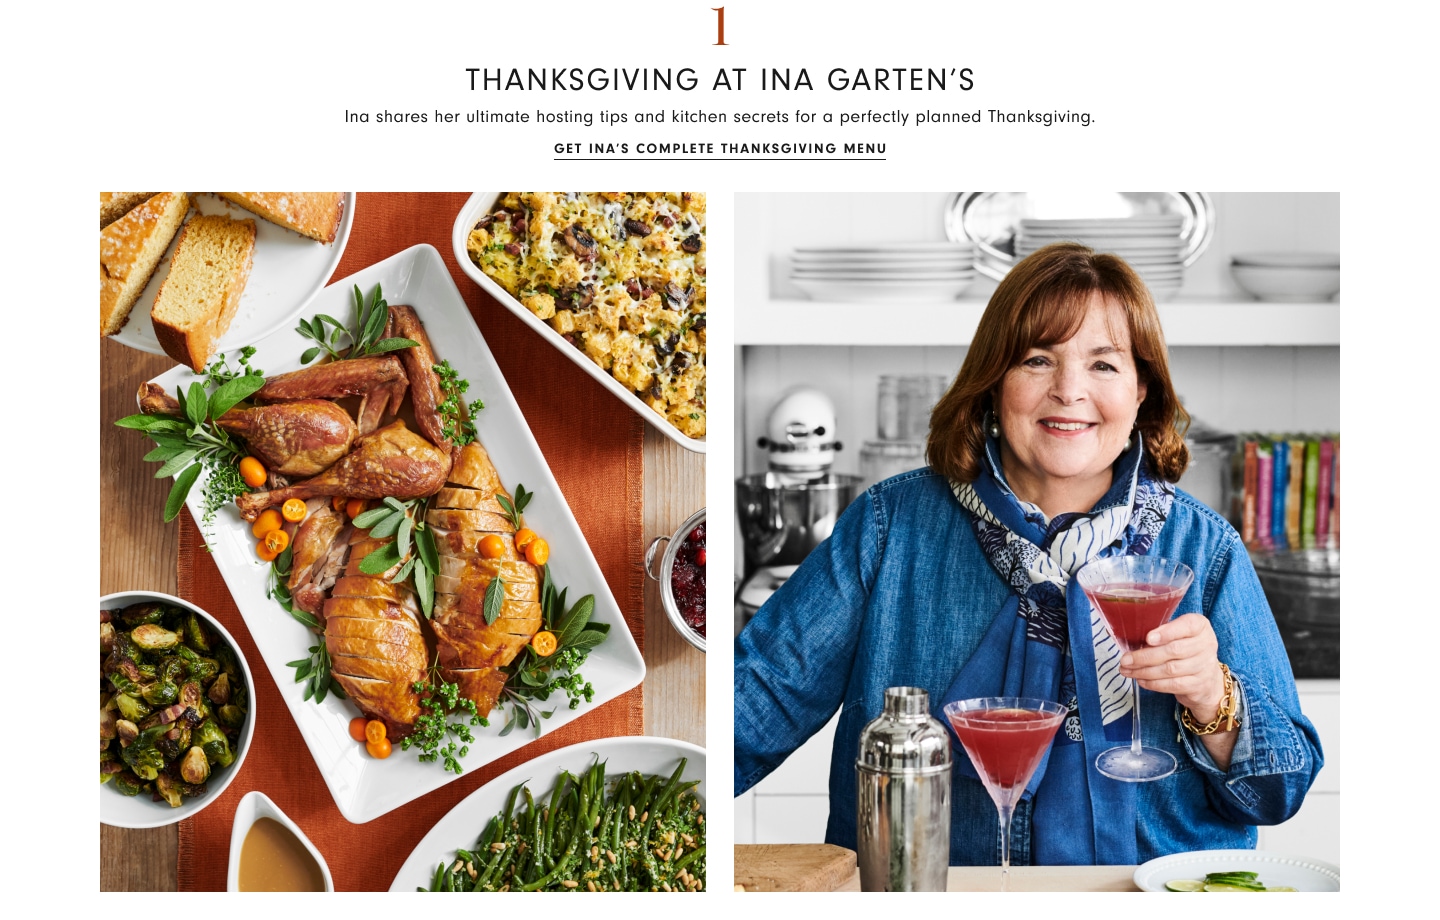 Get Ina's Complete Thanksgiving Menu